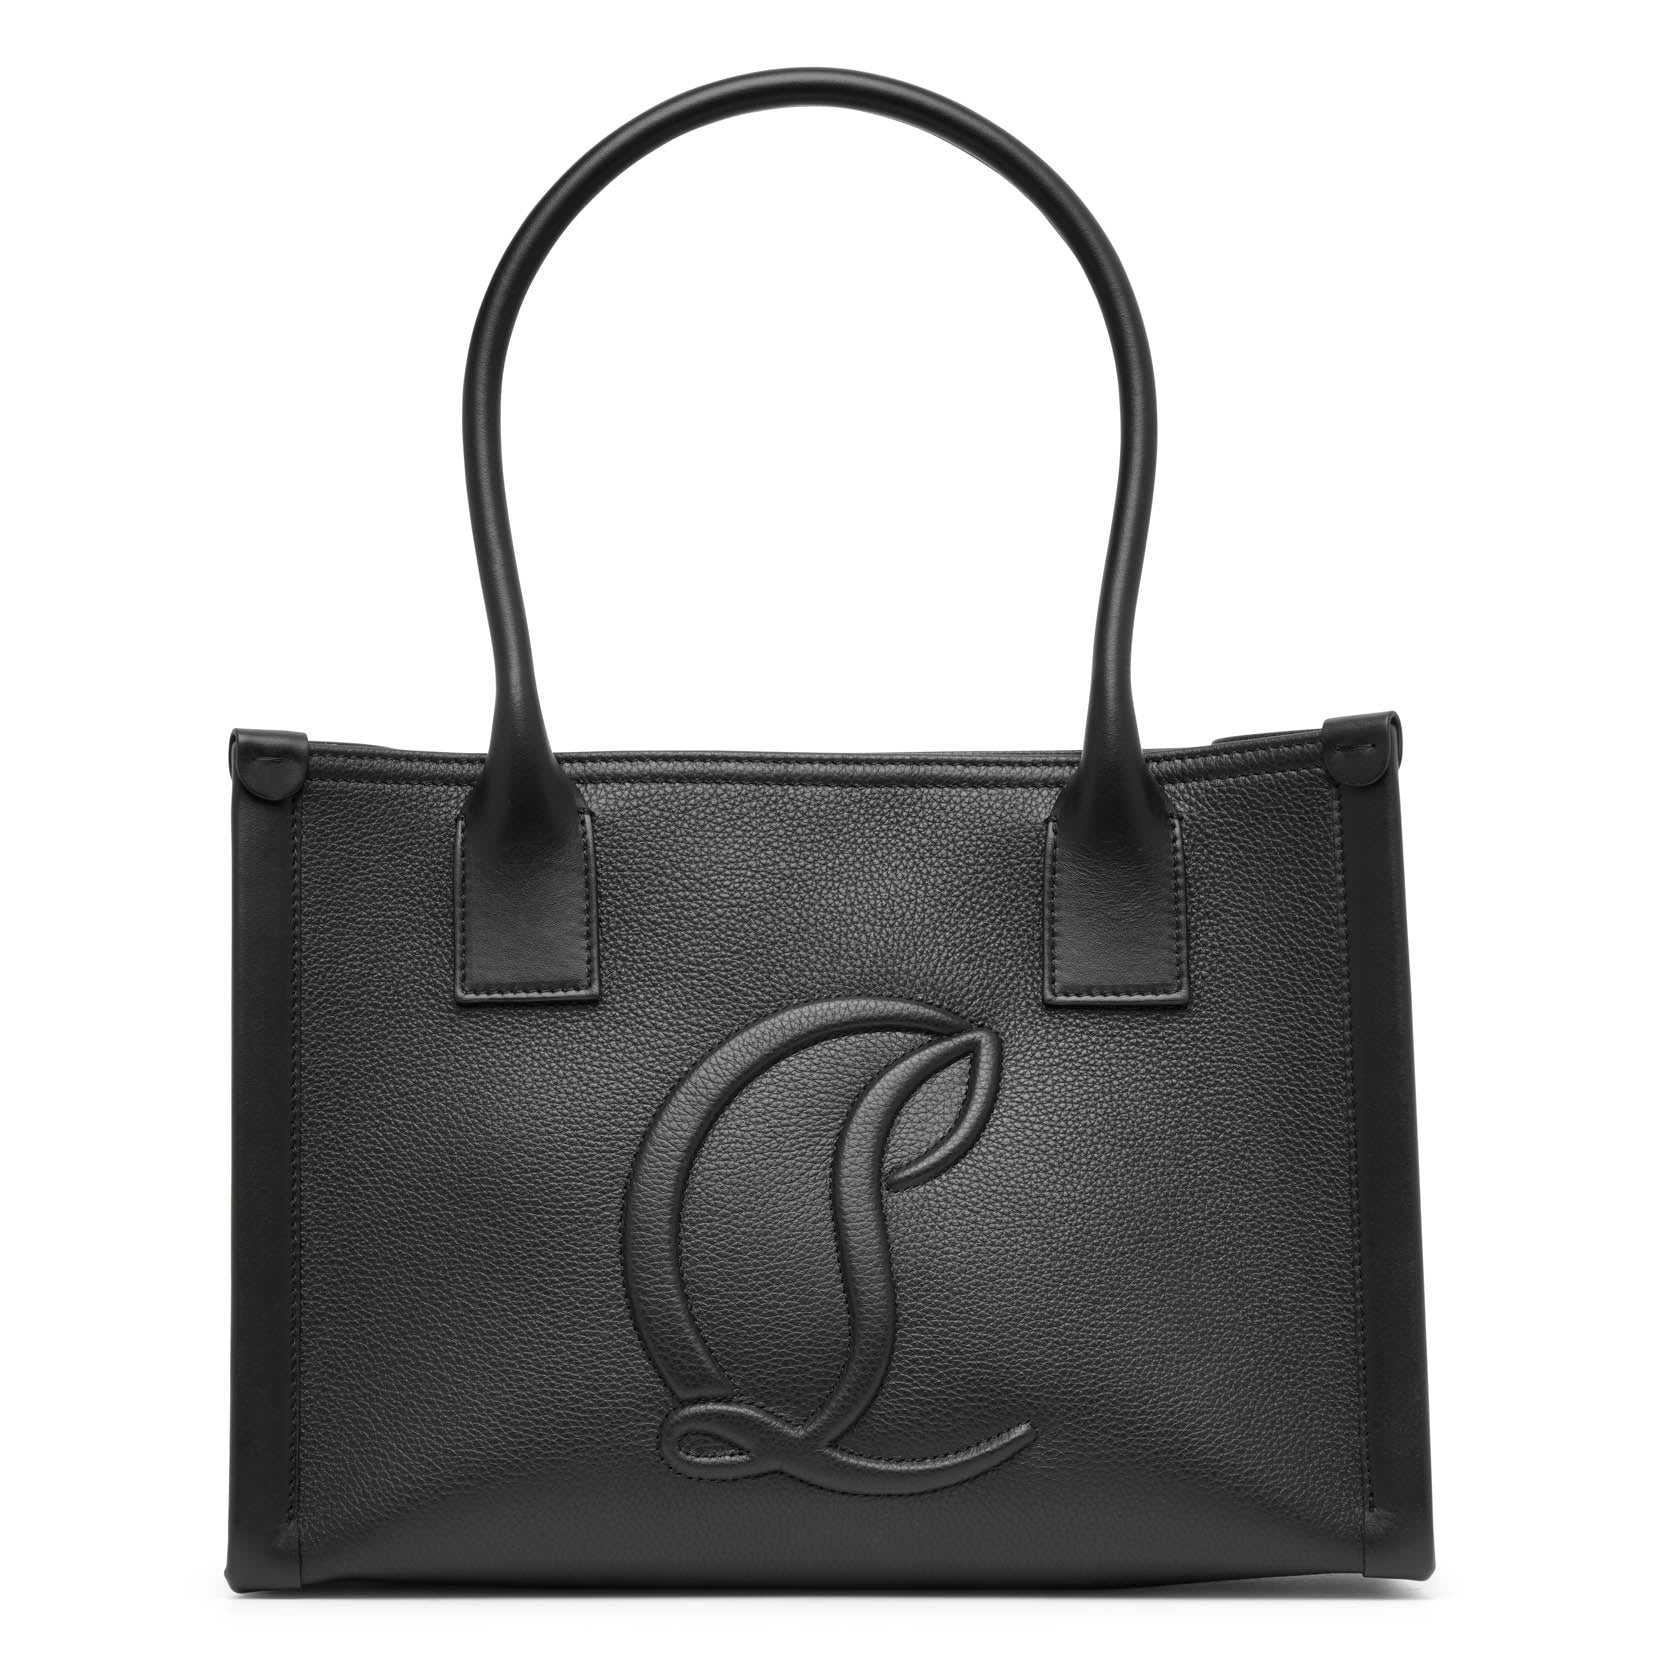 Christian Louboutin By My Side E/w Black Leather Tote Bag